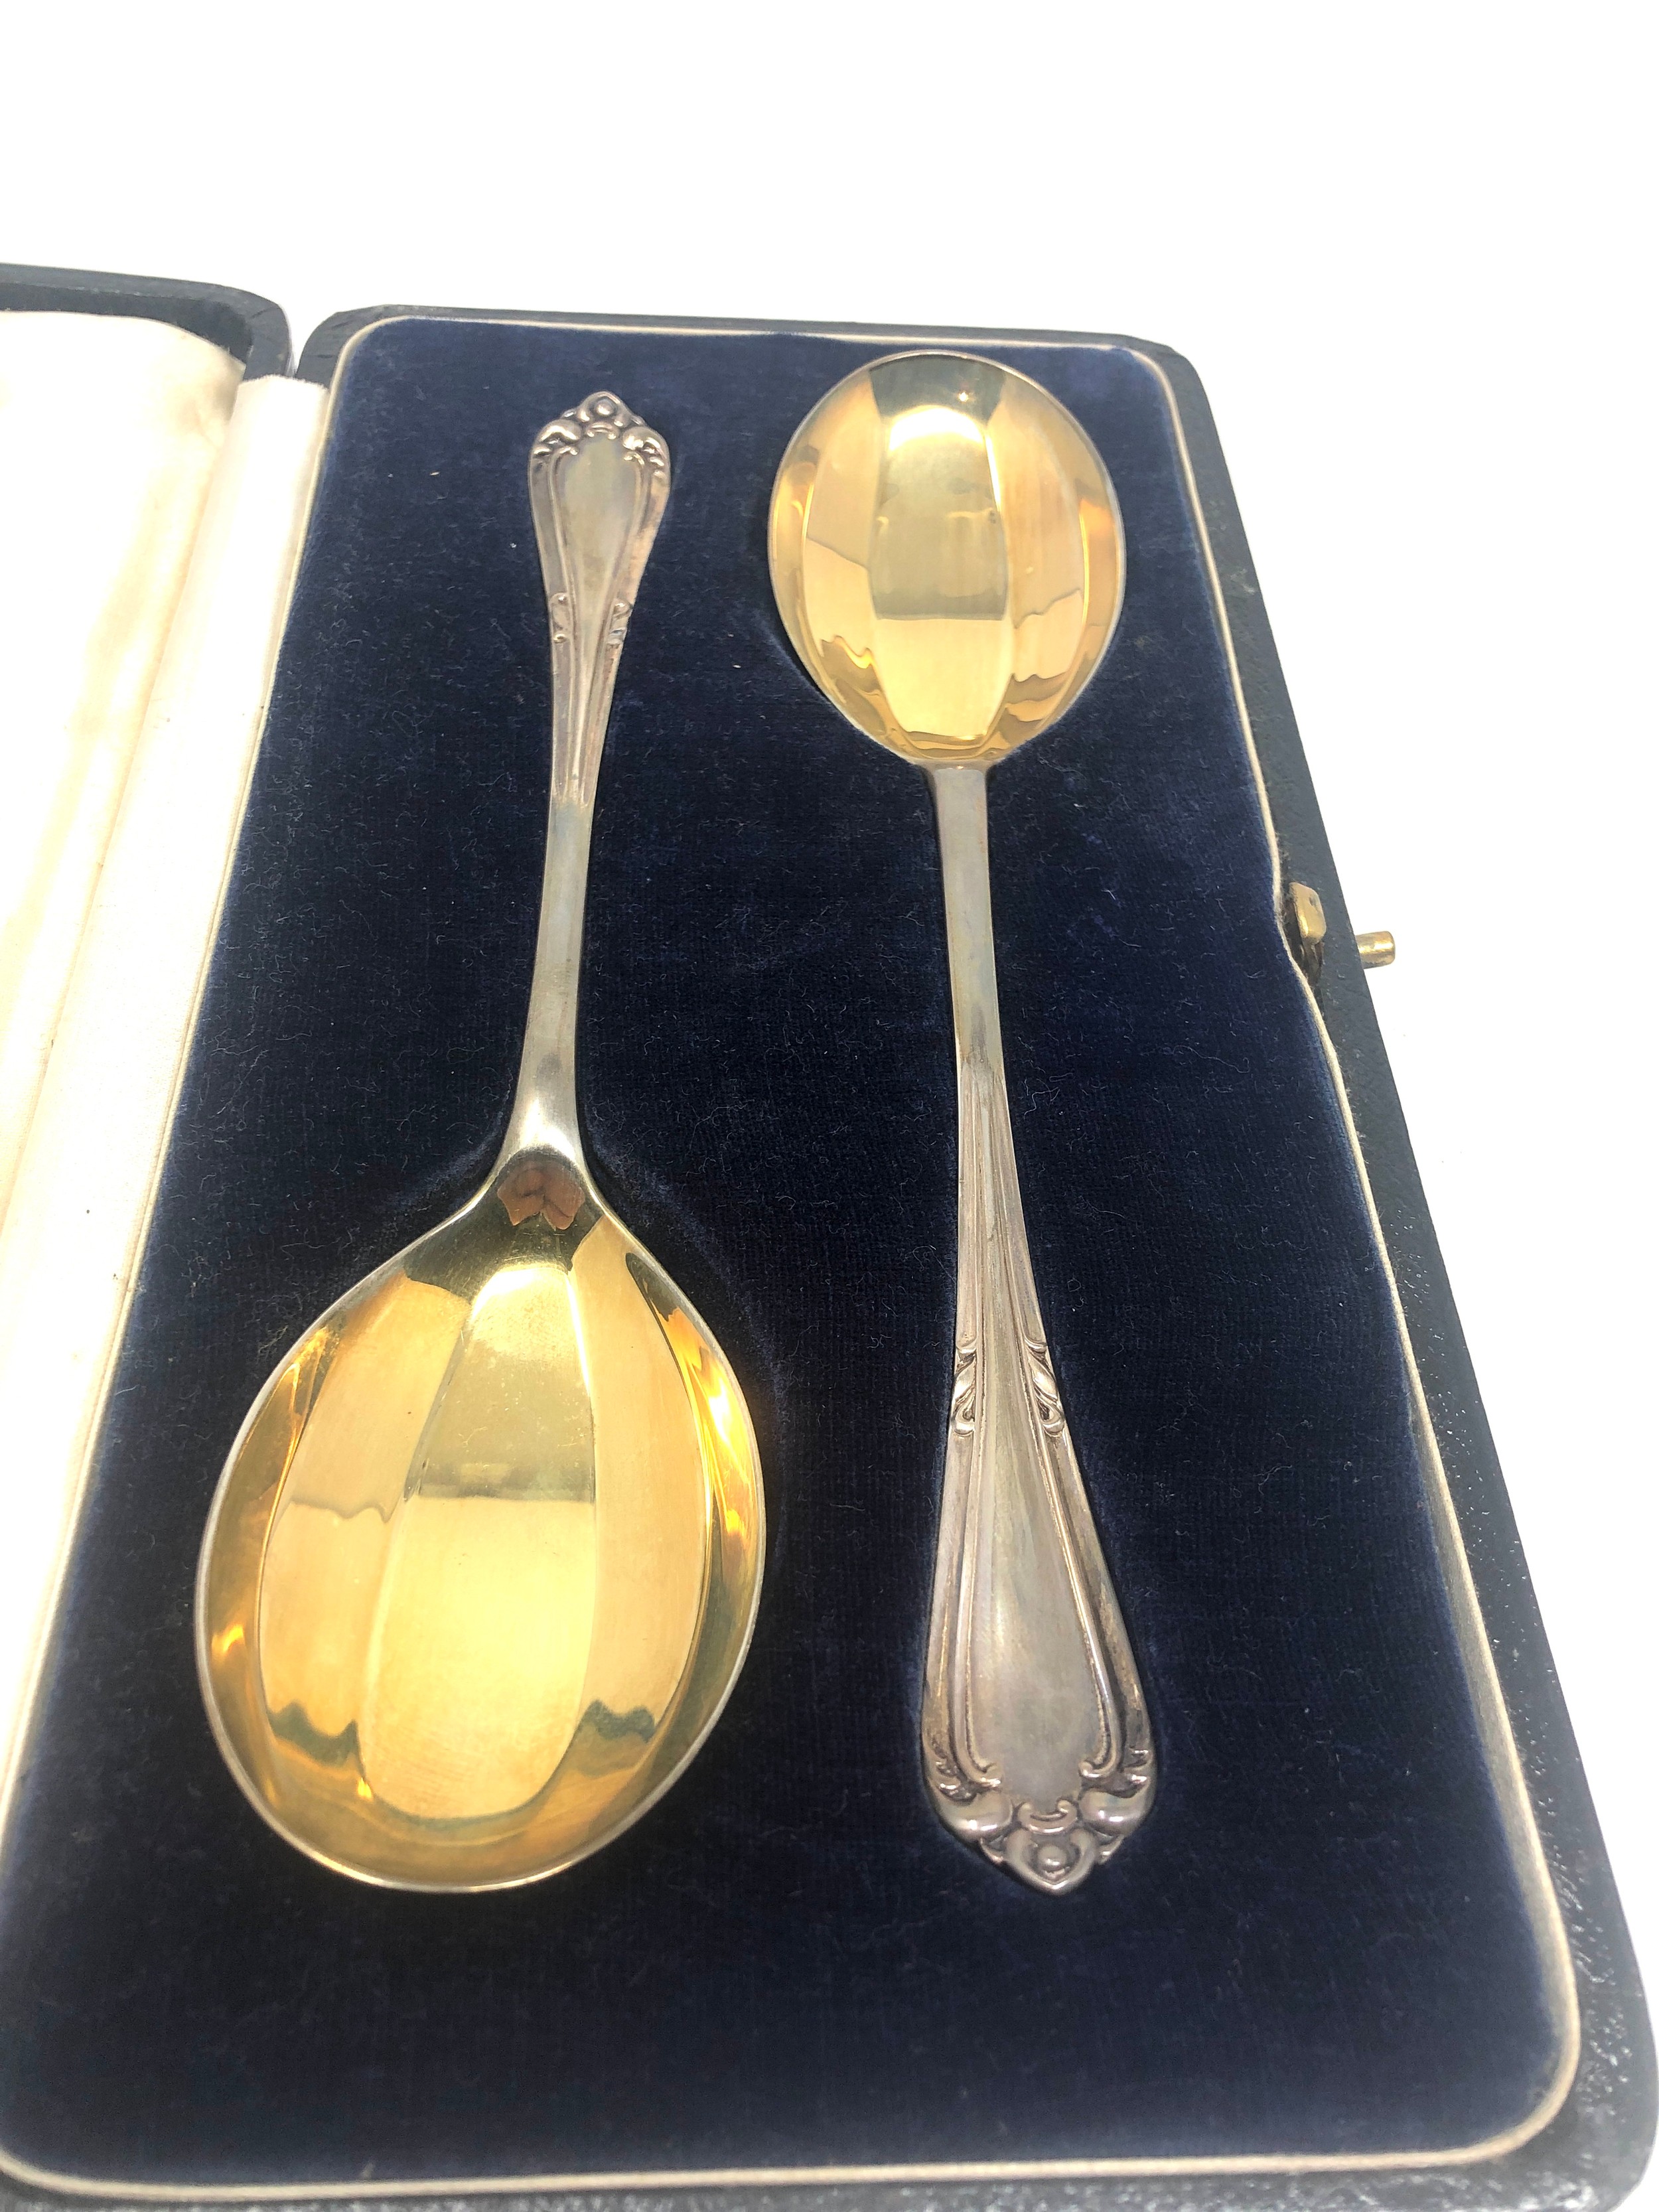 Pair of boxed pearce & sons serving spoons London silver hallmarks silver weight 95g - Image 2 of 3